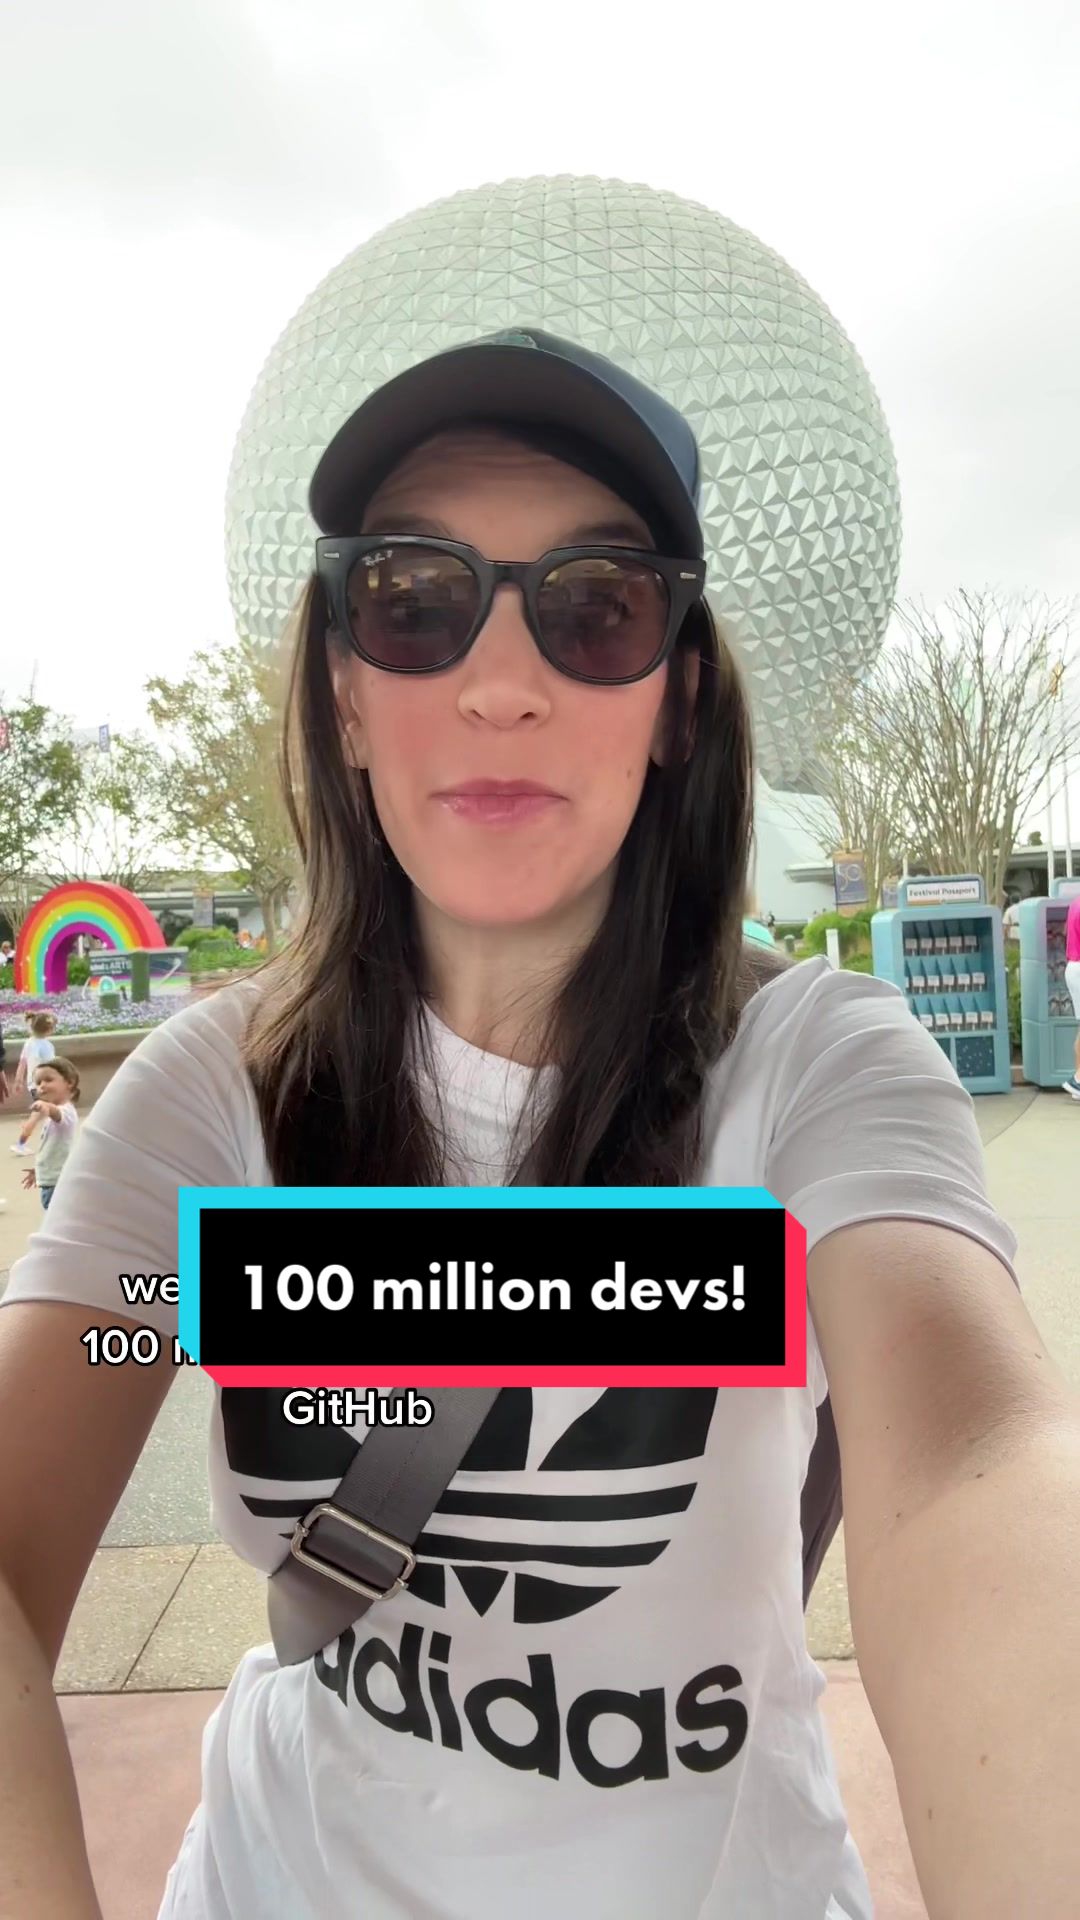 You’re 1 in 100 million ✨ Talk about being in good company! #github #devtok #techtok #developerlife  created by GitHub with GitHub's original sound